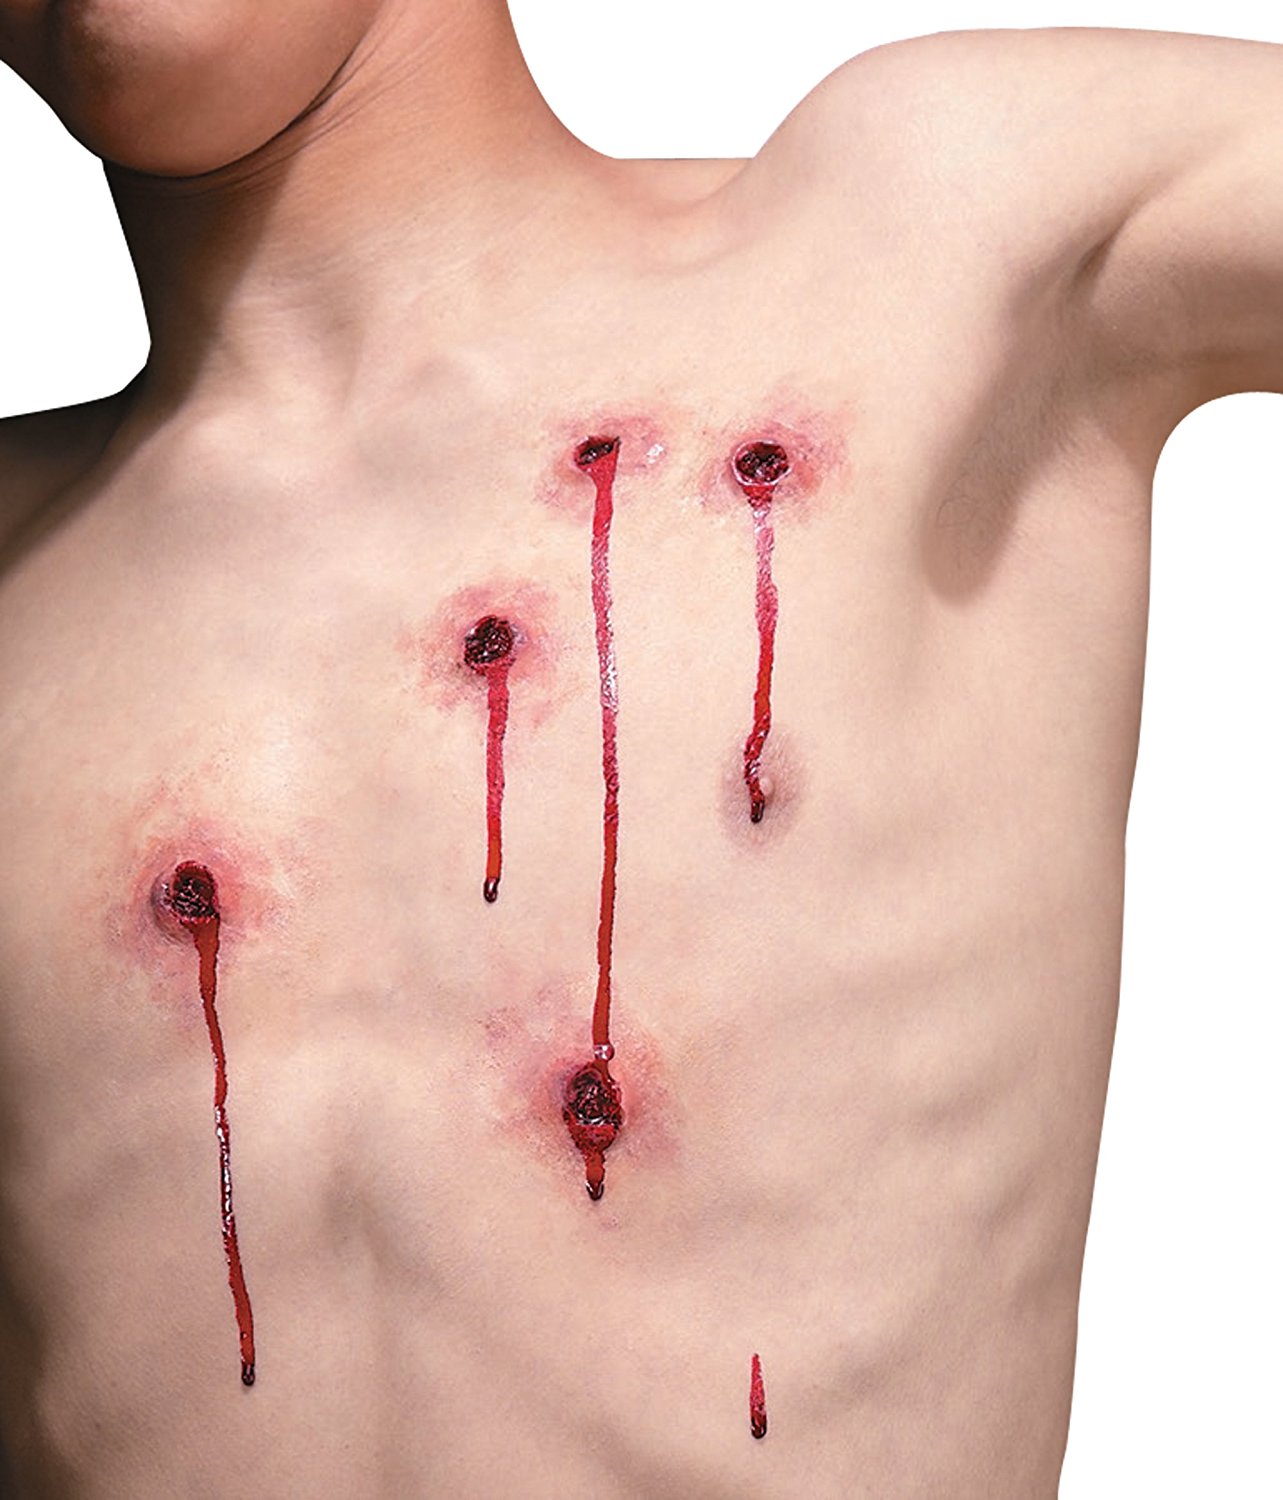 Trauma of a Bullet Wound - Training Newsletter.